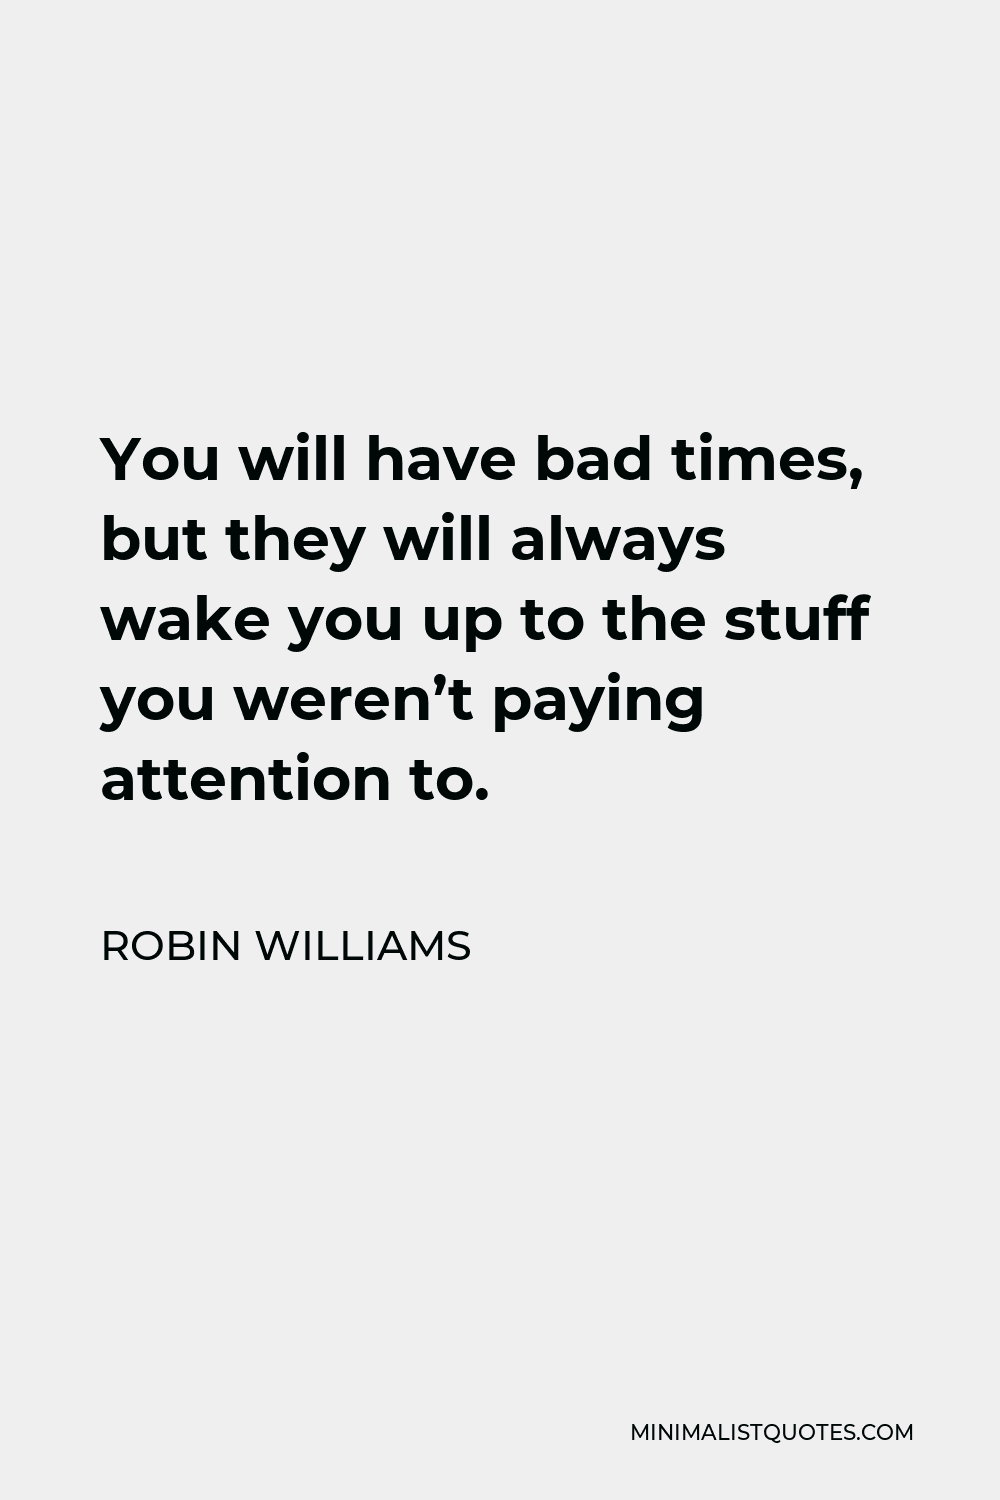 Robin Williams Quote - You will have bad times, but they will always wake you up to the stuff you weren’t paying attention to.